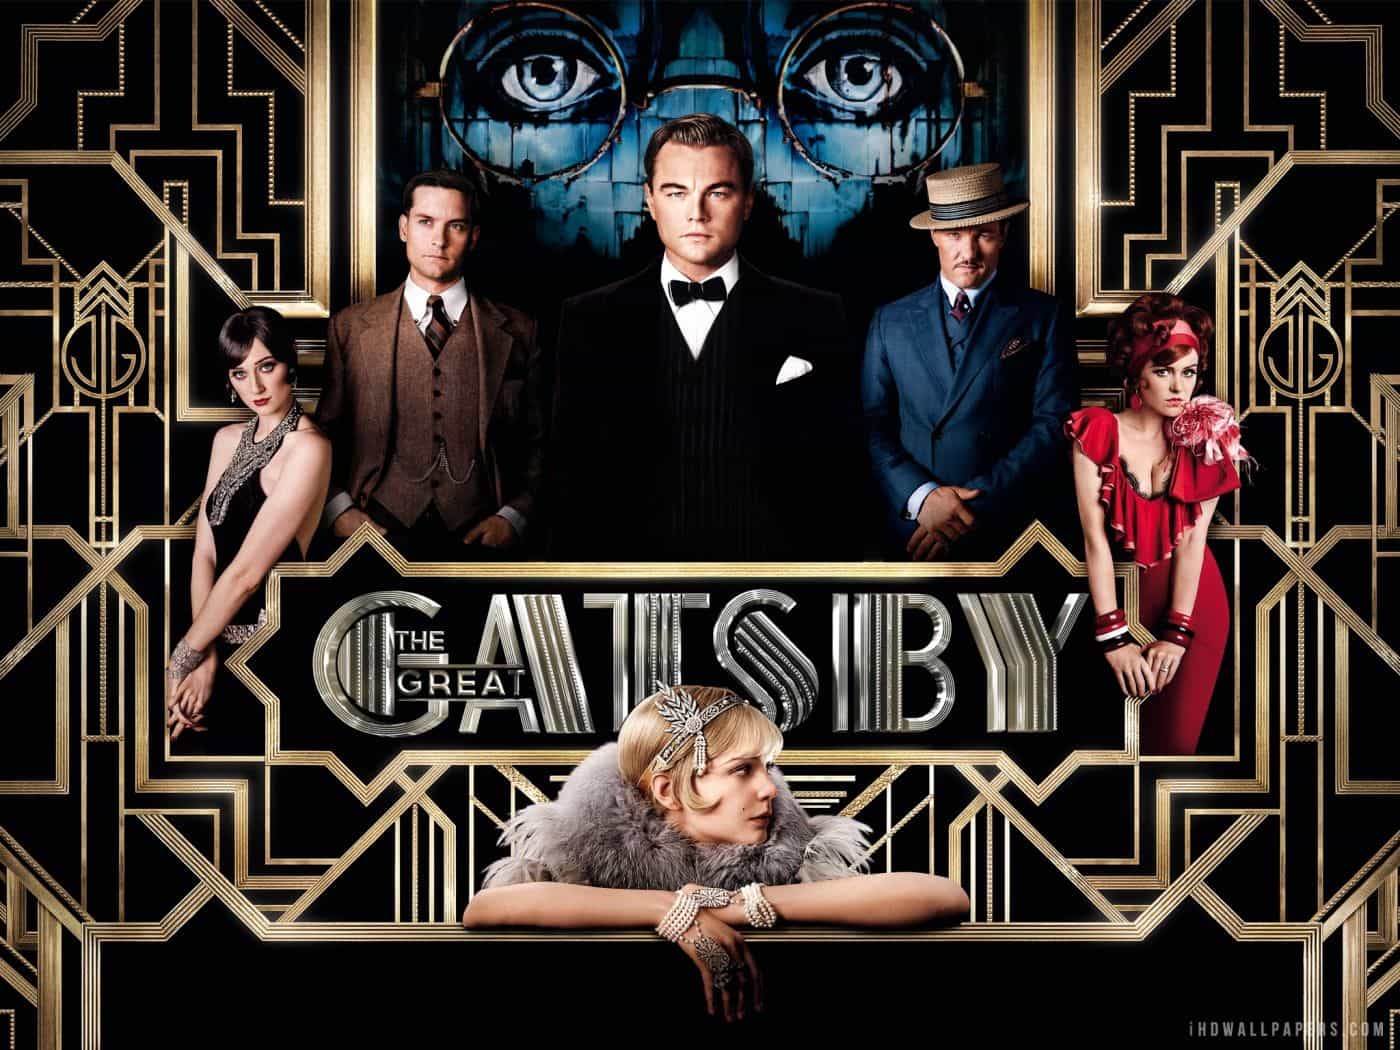 The Great Gatsby: characters and characterization photo